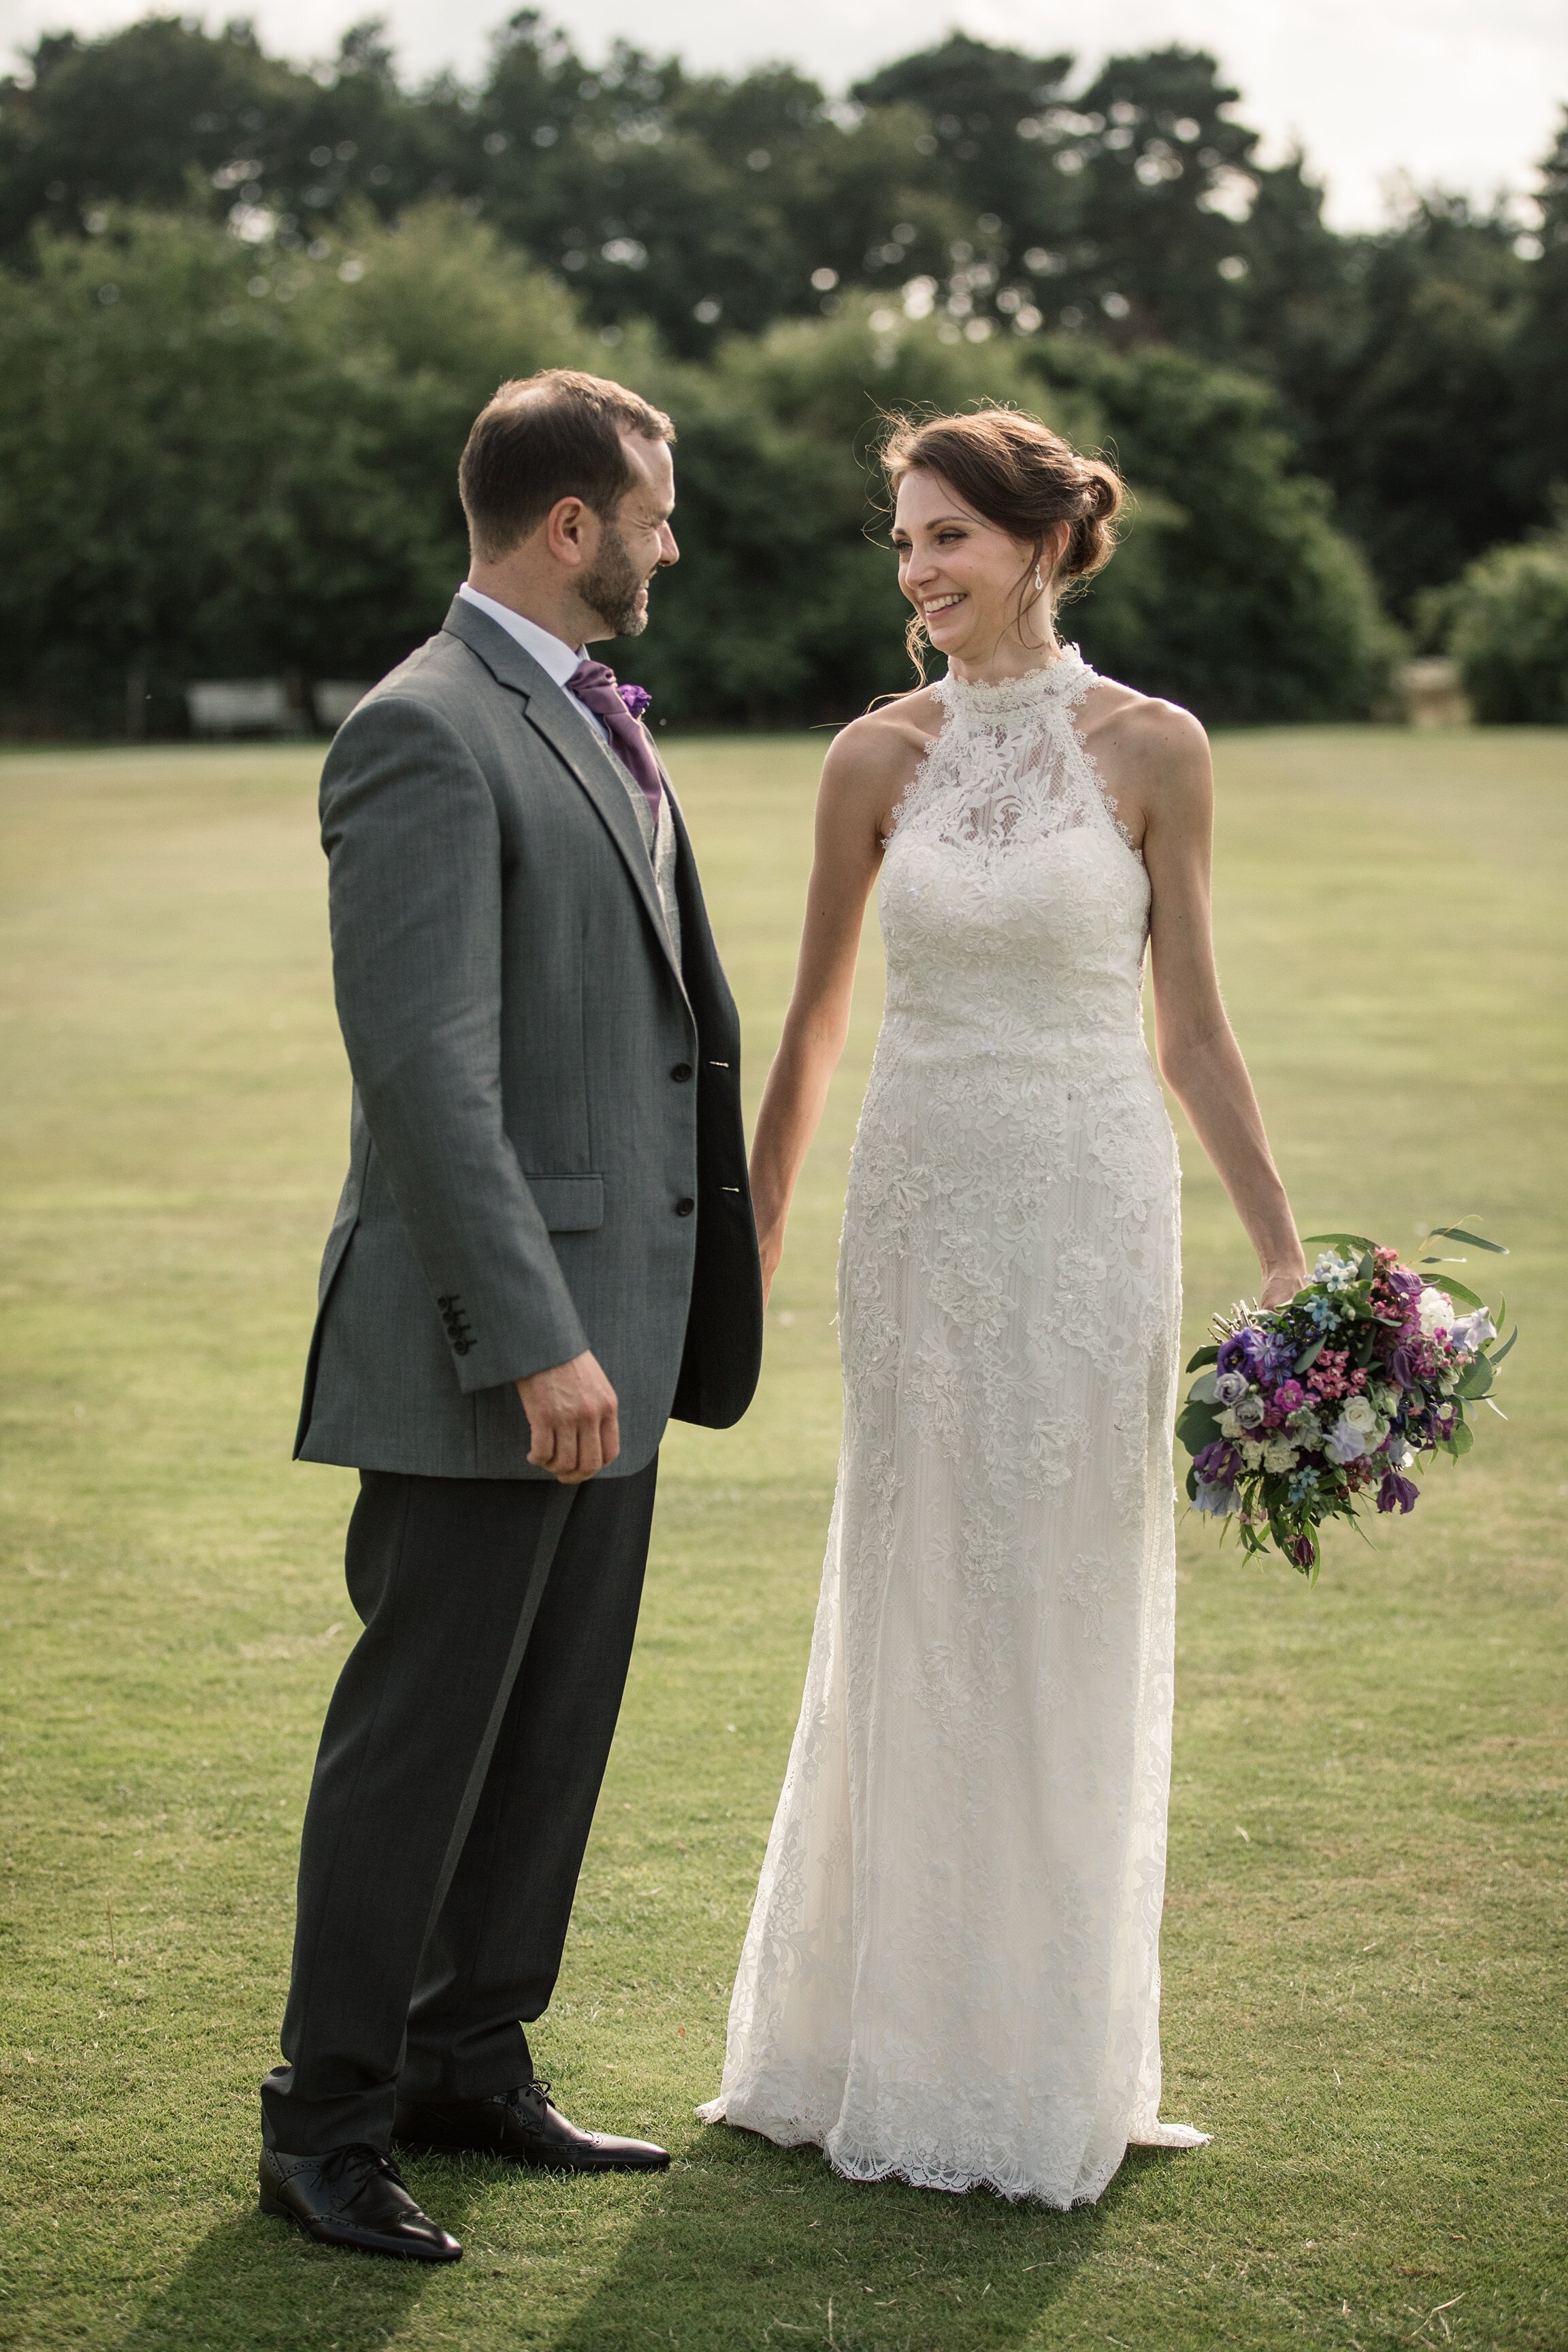 Wedding Outfit Inspiration_High Neck Gown_2020 Bridal trends_Becky Harley